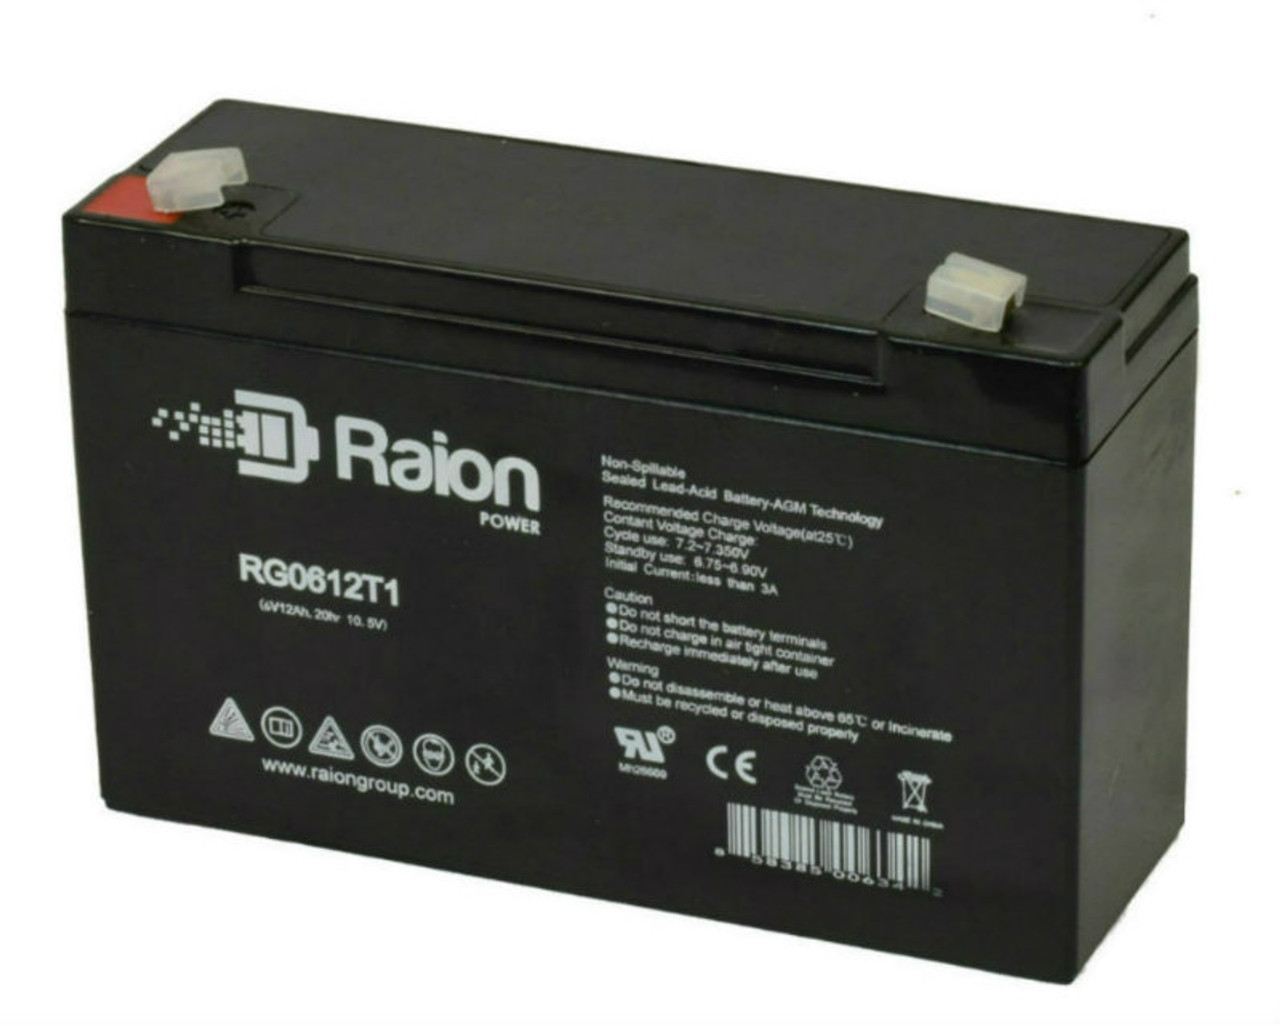 Raion Power RG06120T1 Replacement 6V 12Ah Emergency Light Battery for Dual Lite 12-533